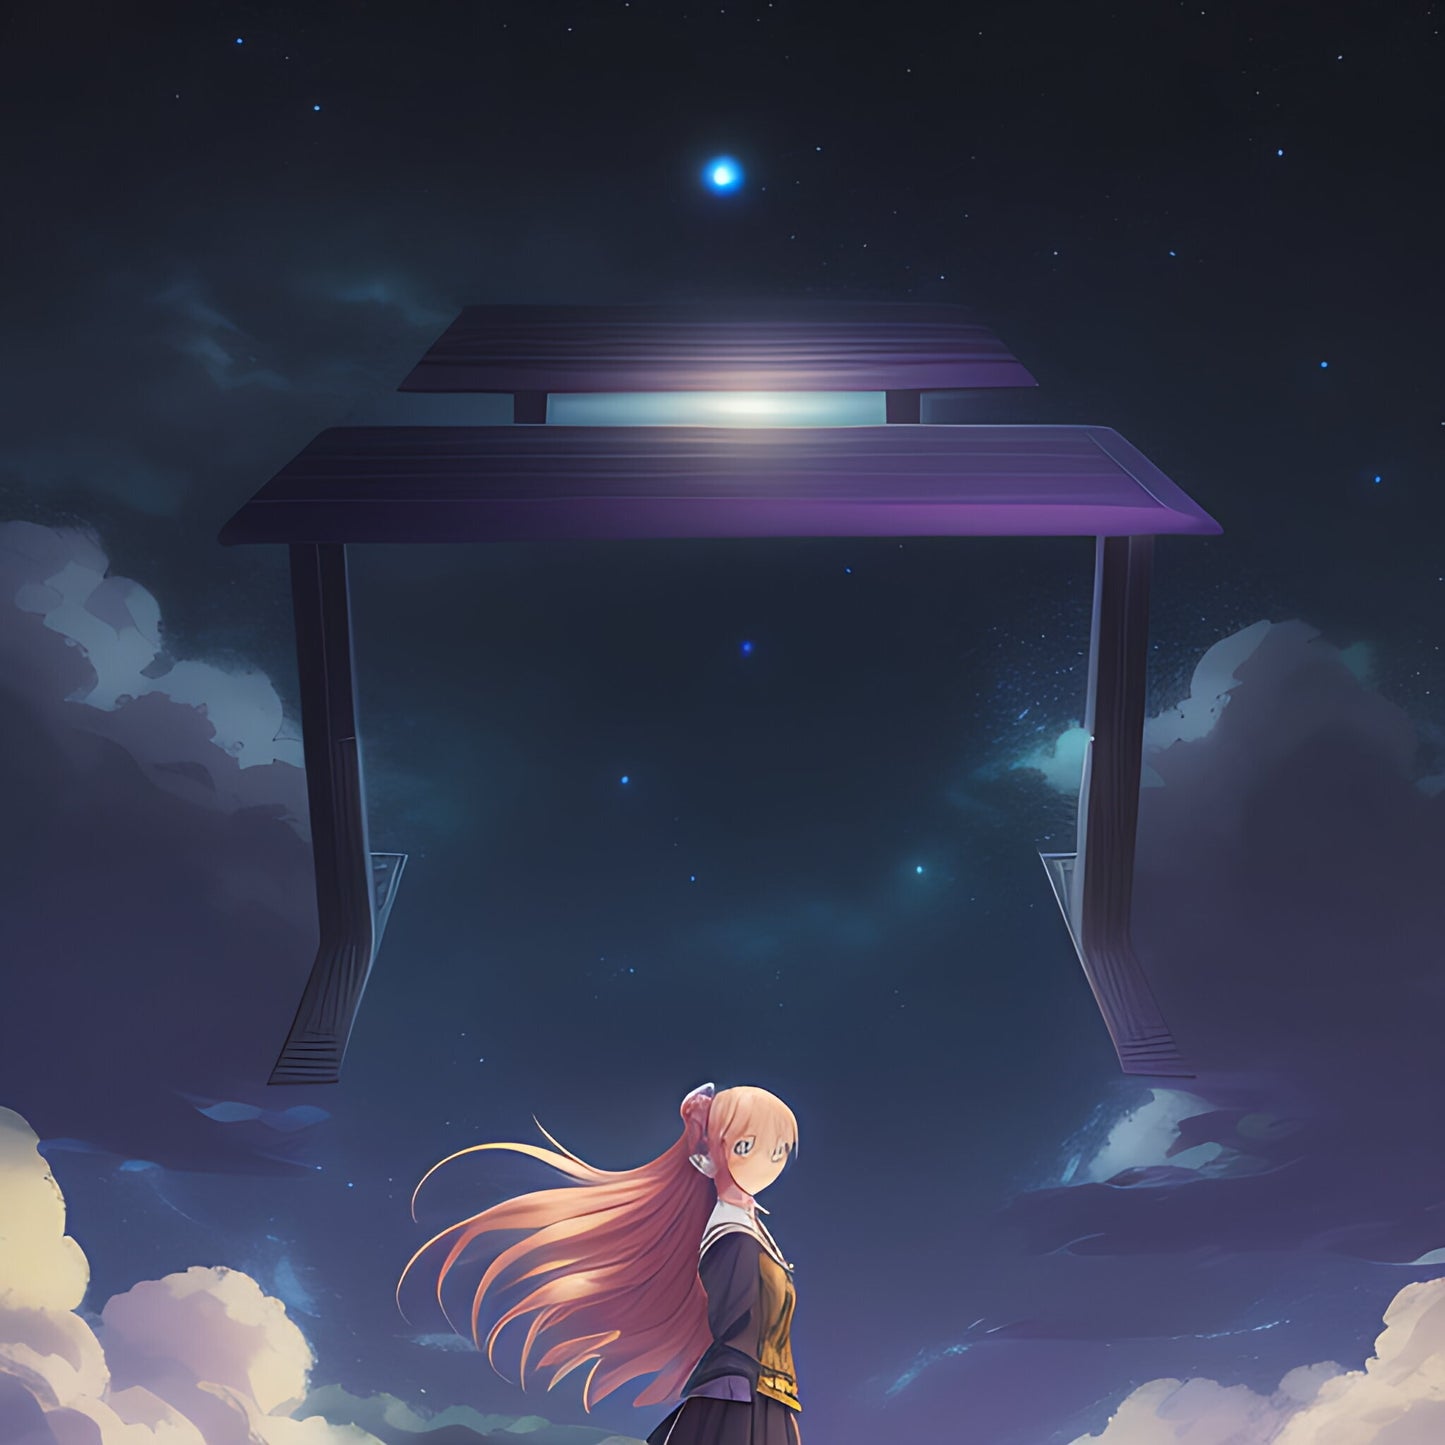 Ai image of a black desk with a gaming princess in the night sky.